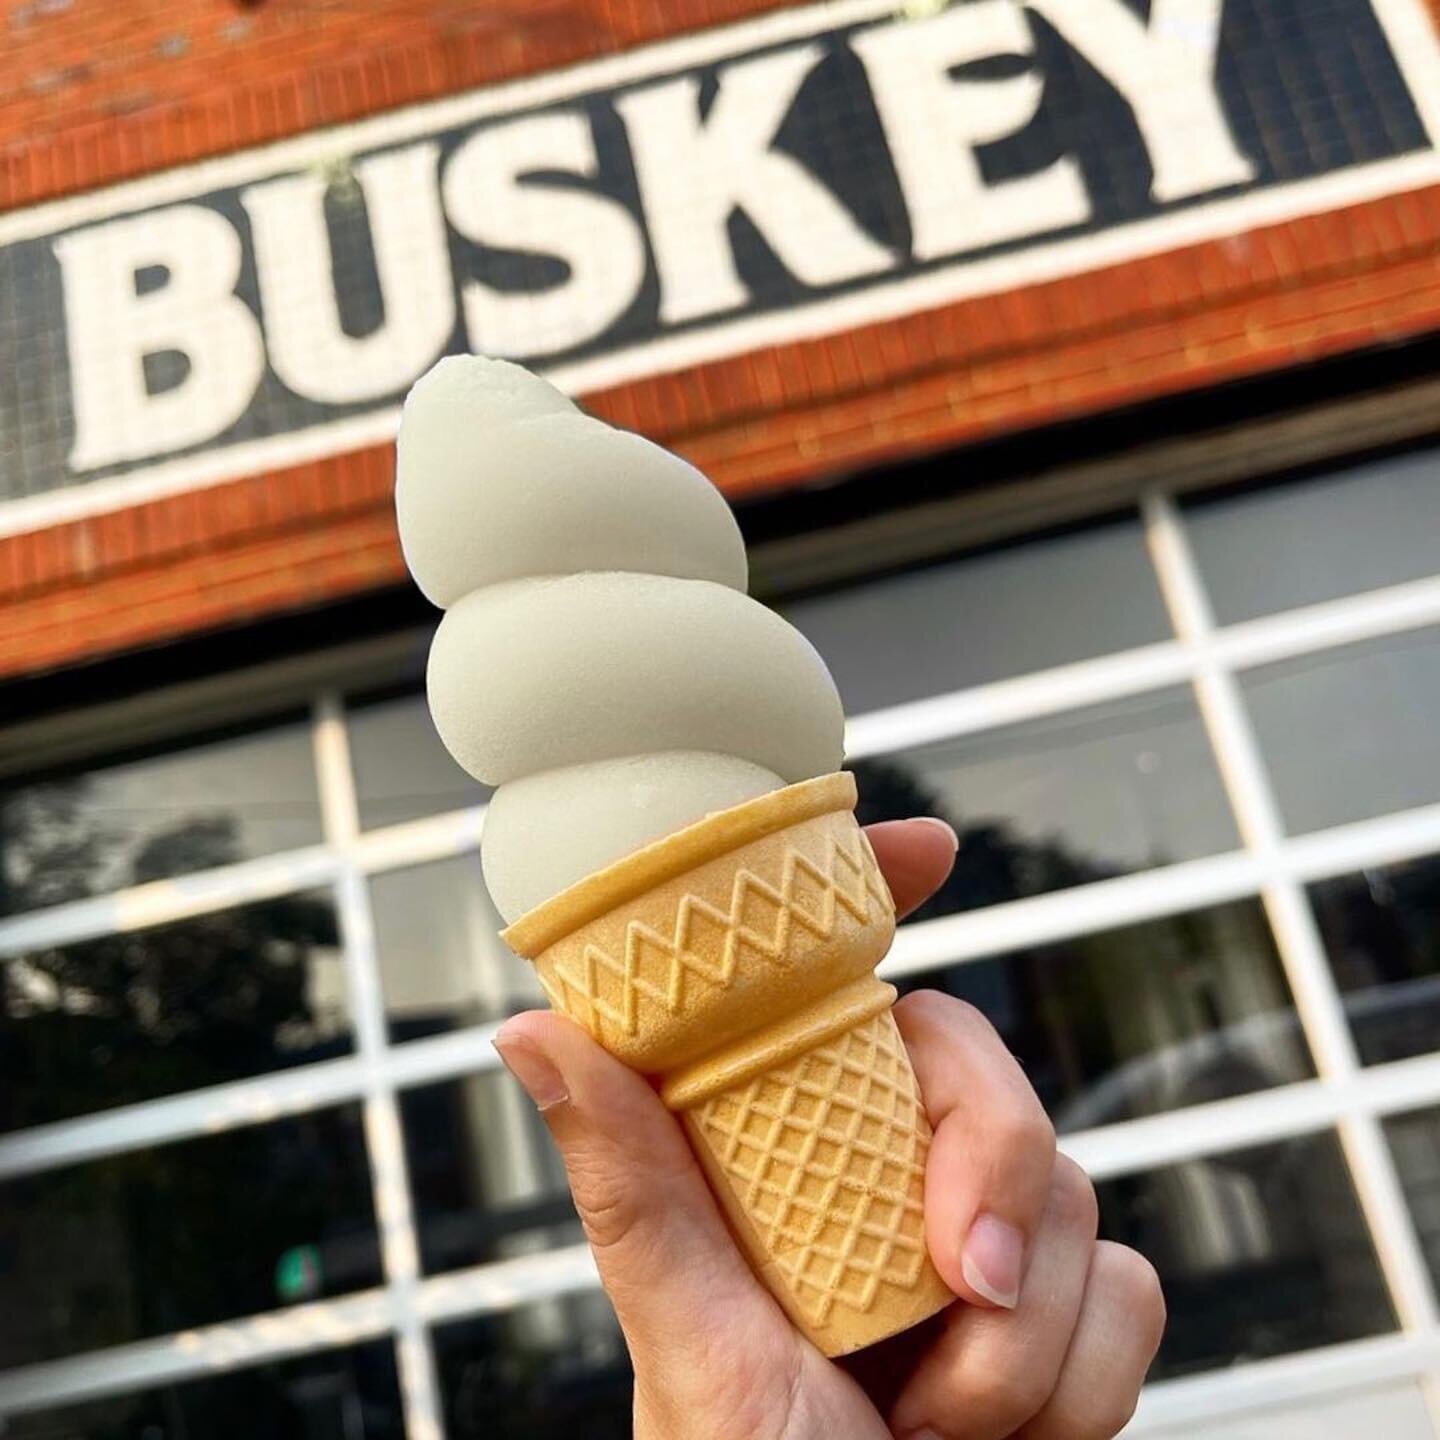 ALCOHOLIC SOFT SERVE 🍦 @buskeycider&rsquo;s Watermelon Rosemary hard craft cider (an RVA summer classic 🍉) is coming at you in the form of boozy ice cream cones this weekend!

Get ready, because this cool treat will be released this Friday 7/23 at 